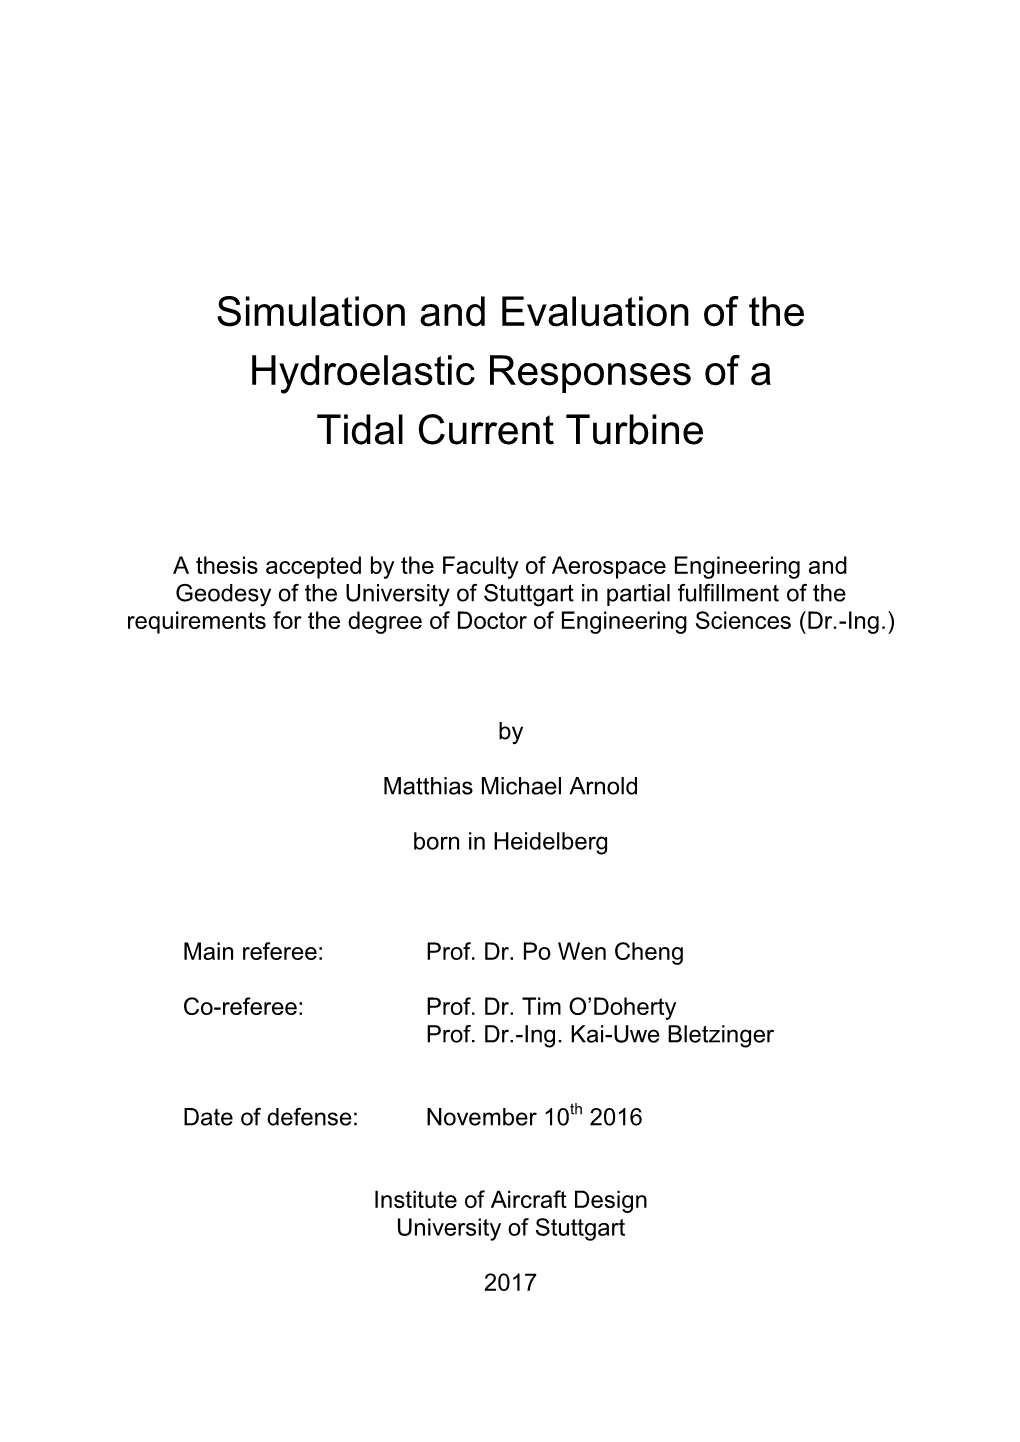 Simulation and Evaluation of the Hydroelastic Responses of a Tidal Current Turbine